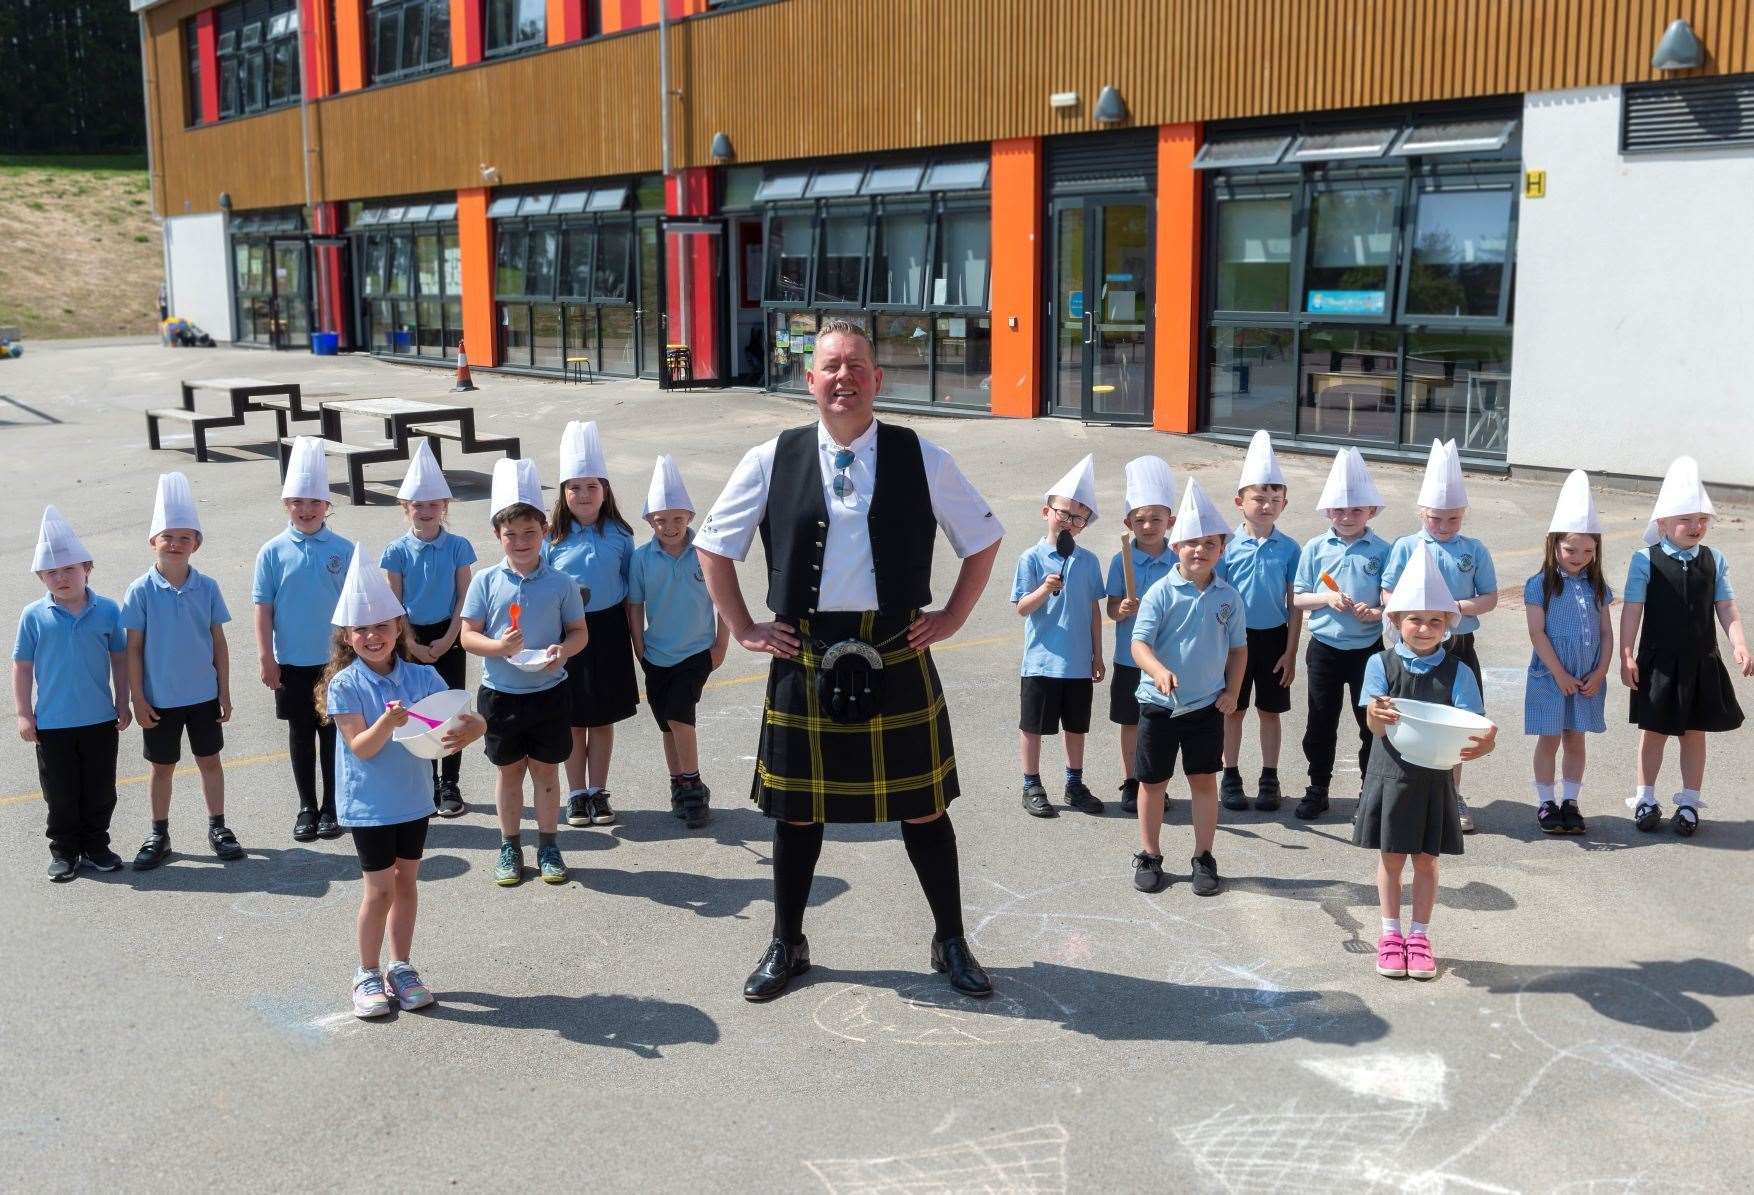 Craig Wilson, the Kilted Chef and owner of Eat on the Green restaurant launches the Kilted Kitchen Learning Project to inspire young people to share his passion for food, shown here with Primary 1 and Primary 2 pupils from Alford Primary School.